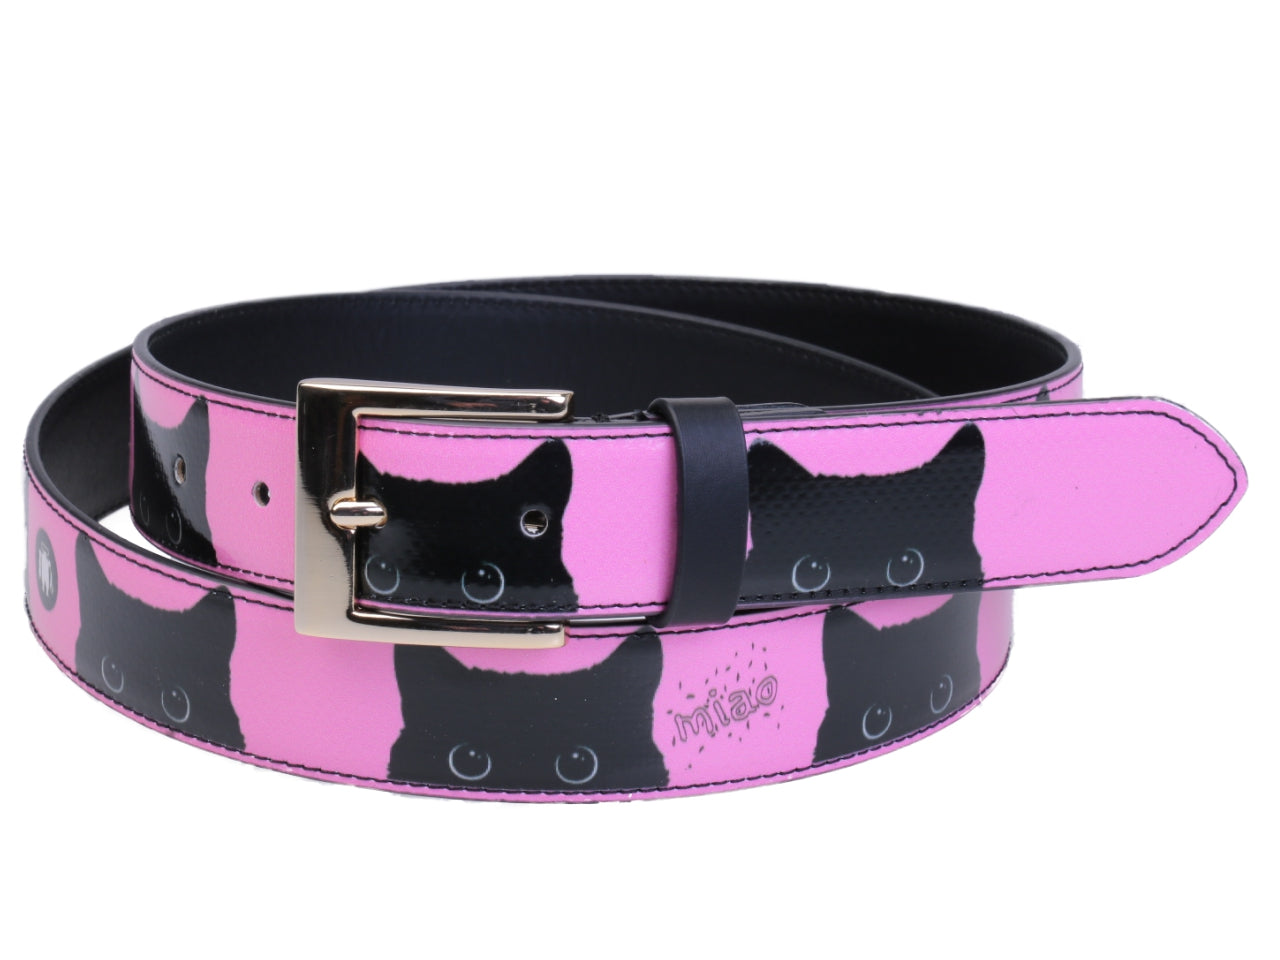 PINK AND BLACK WOMEN'S BELT "KITTENS" MADE OF LORRY TARPAULIN. - Unique Pieces Paul Meccanico